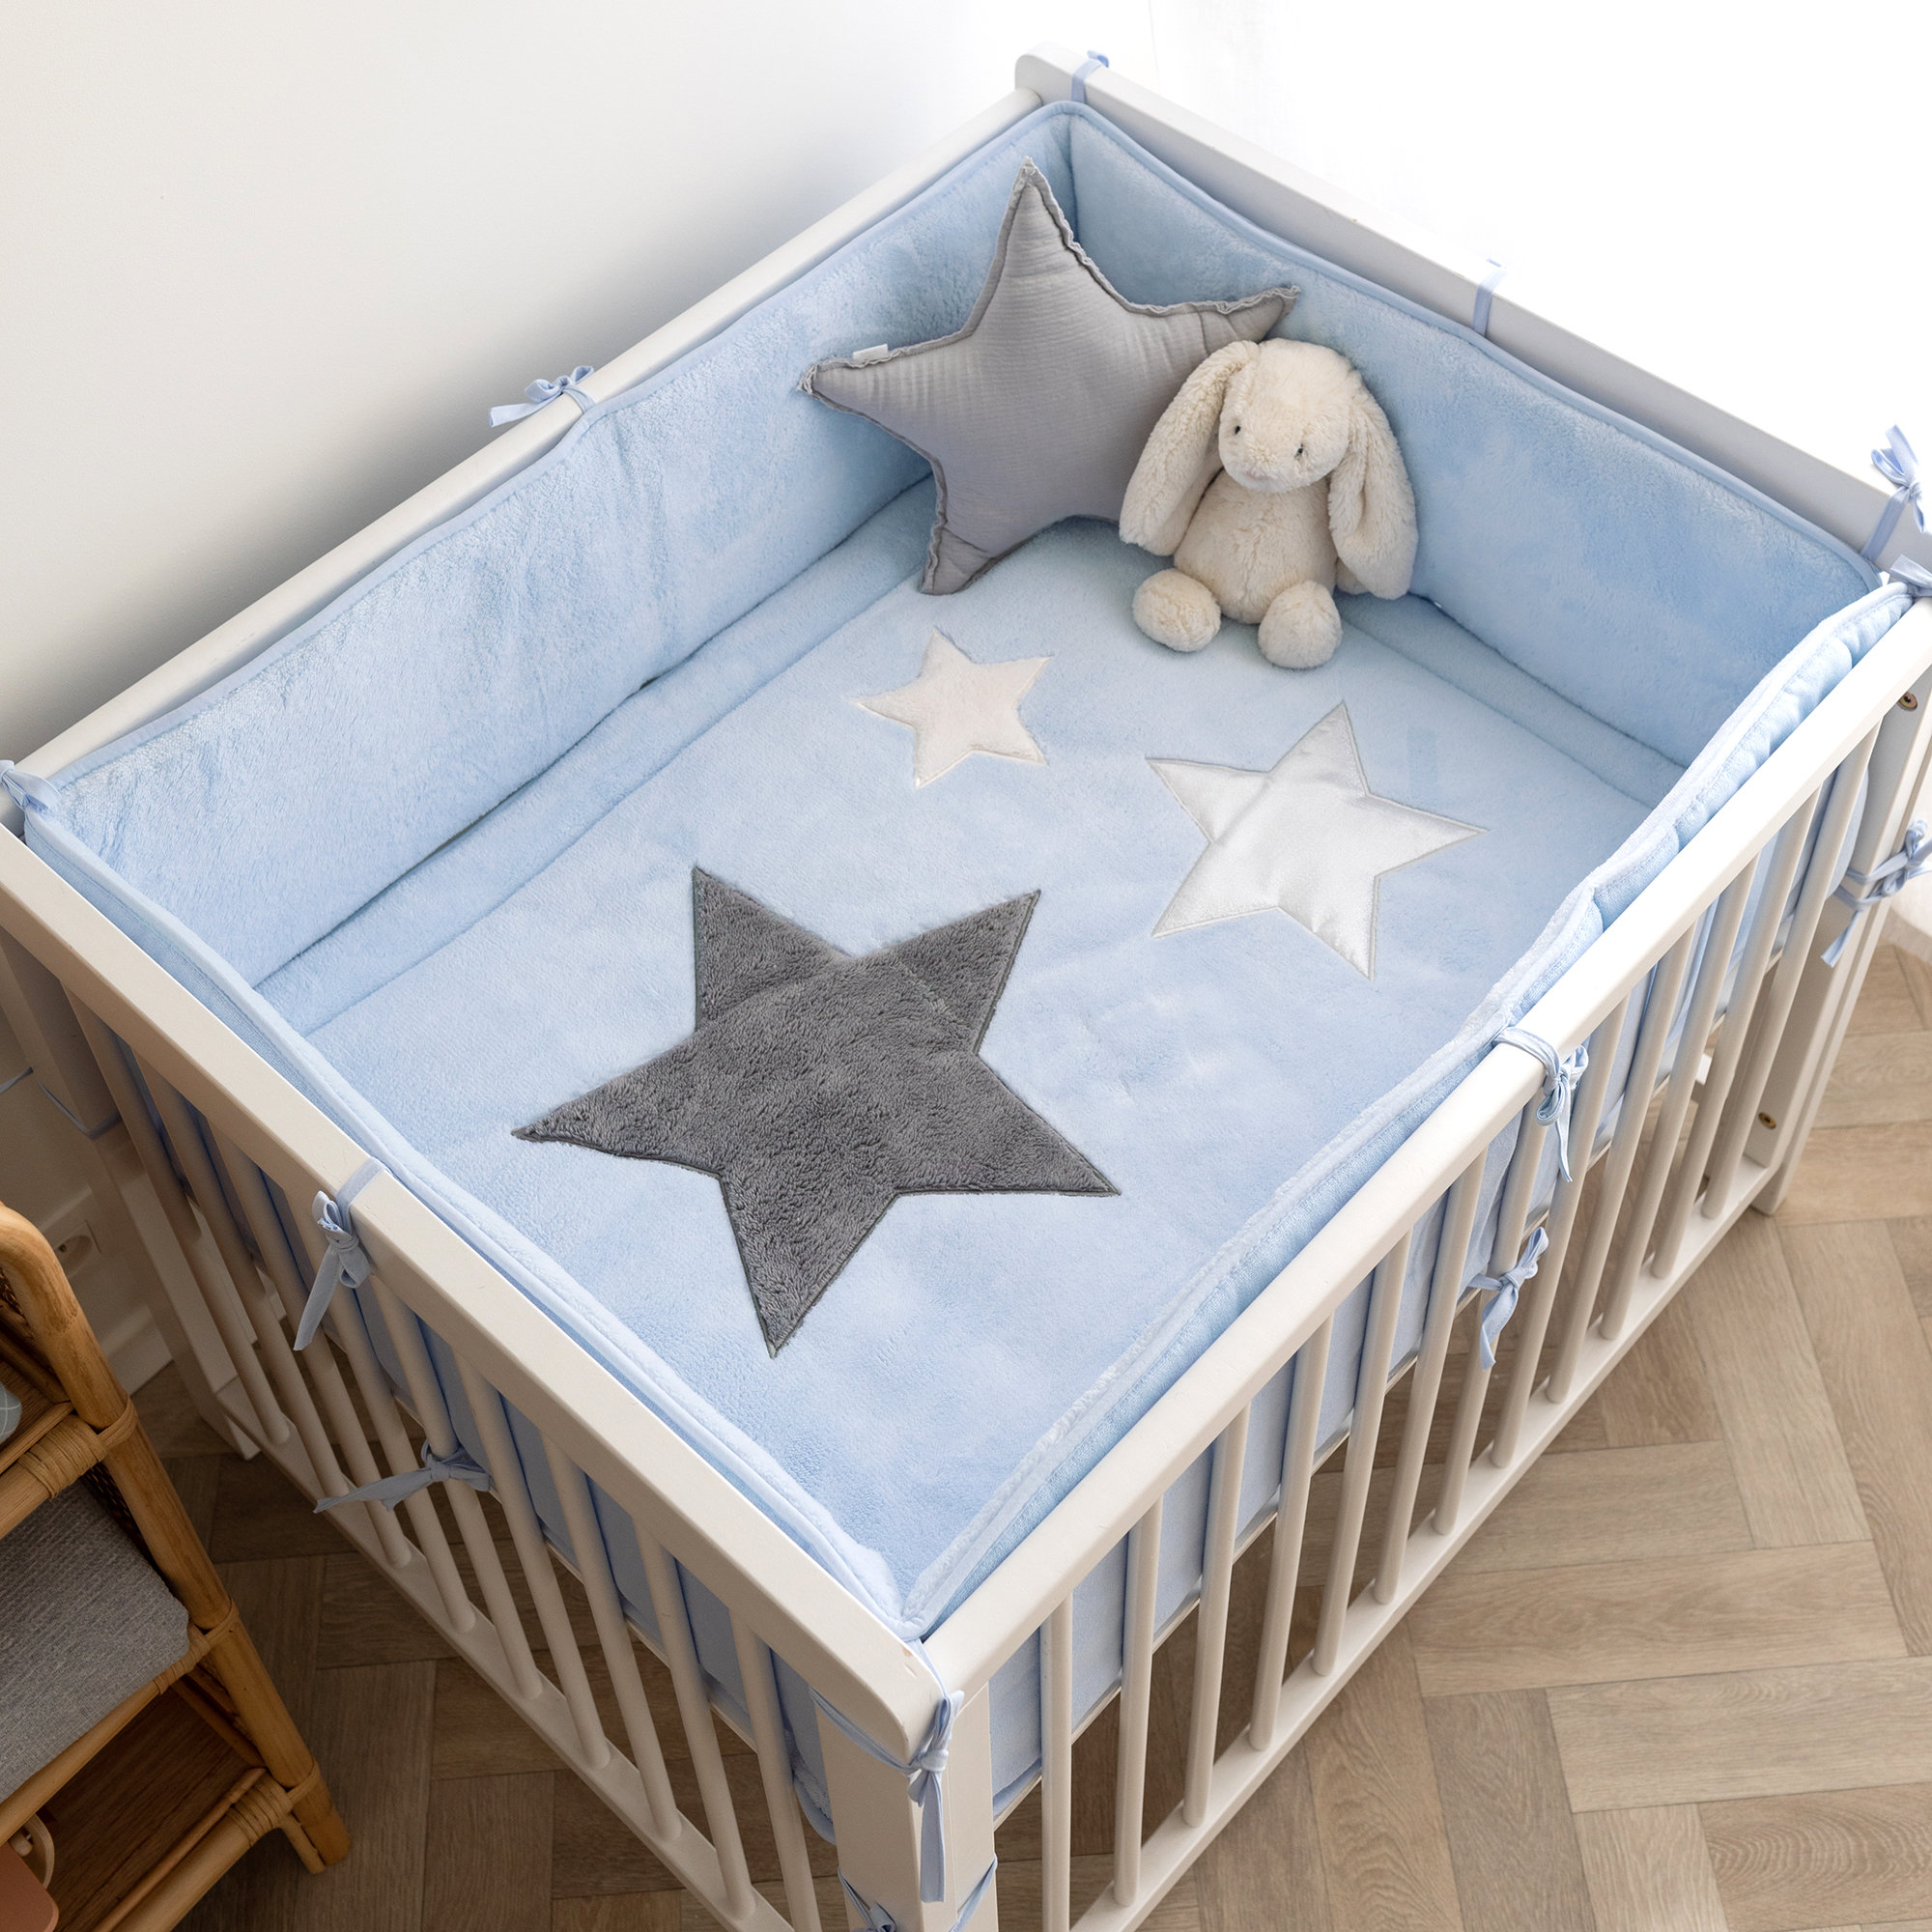 Padded play mat Pady softy + terry 75x95cm STARY Stars print frost